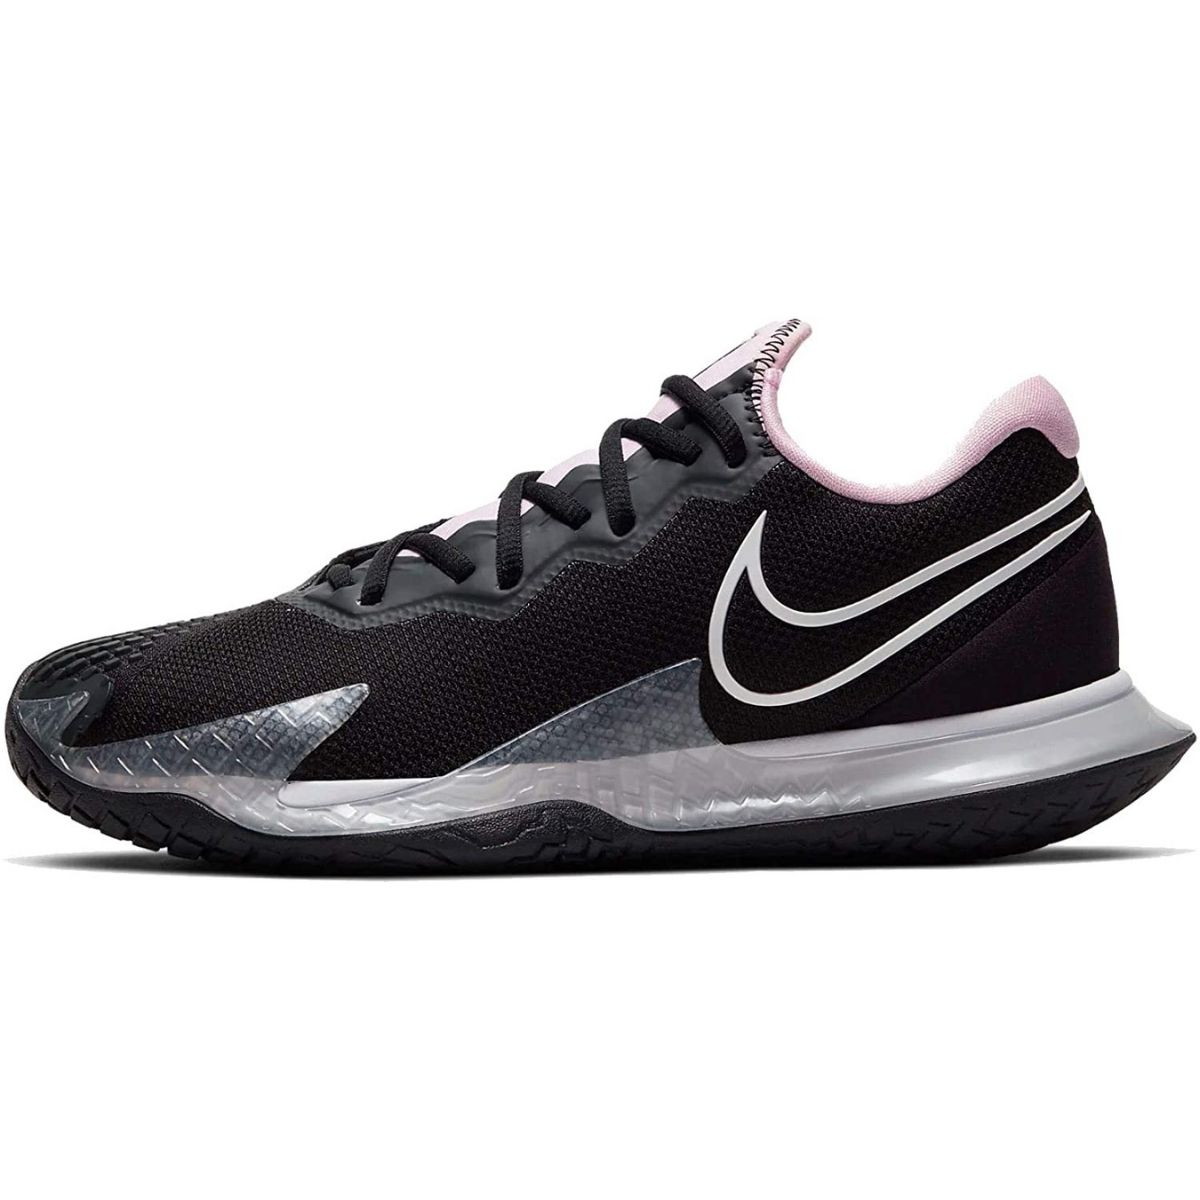 The Best Tennis Shoes Options: Nike Air Zoom Cage 4 HC